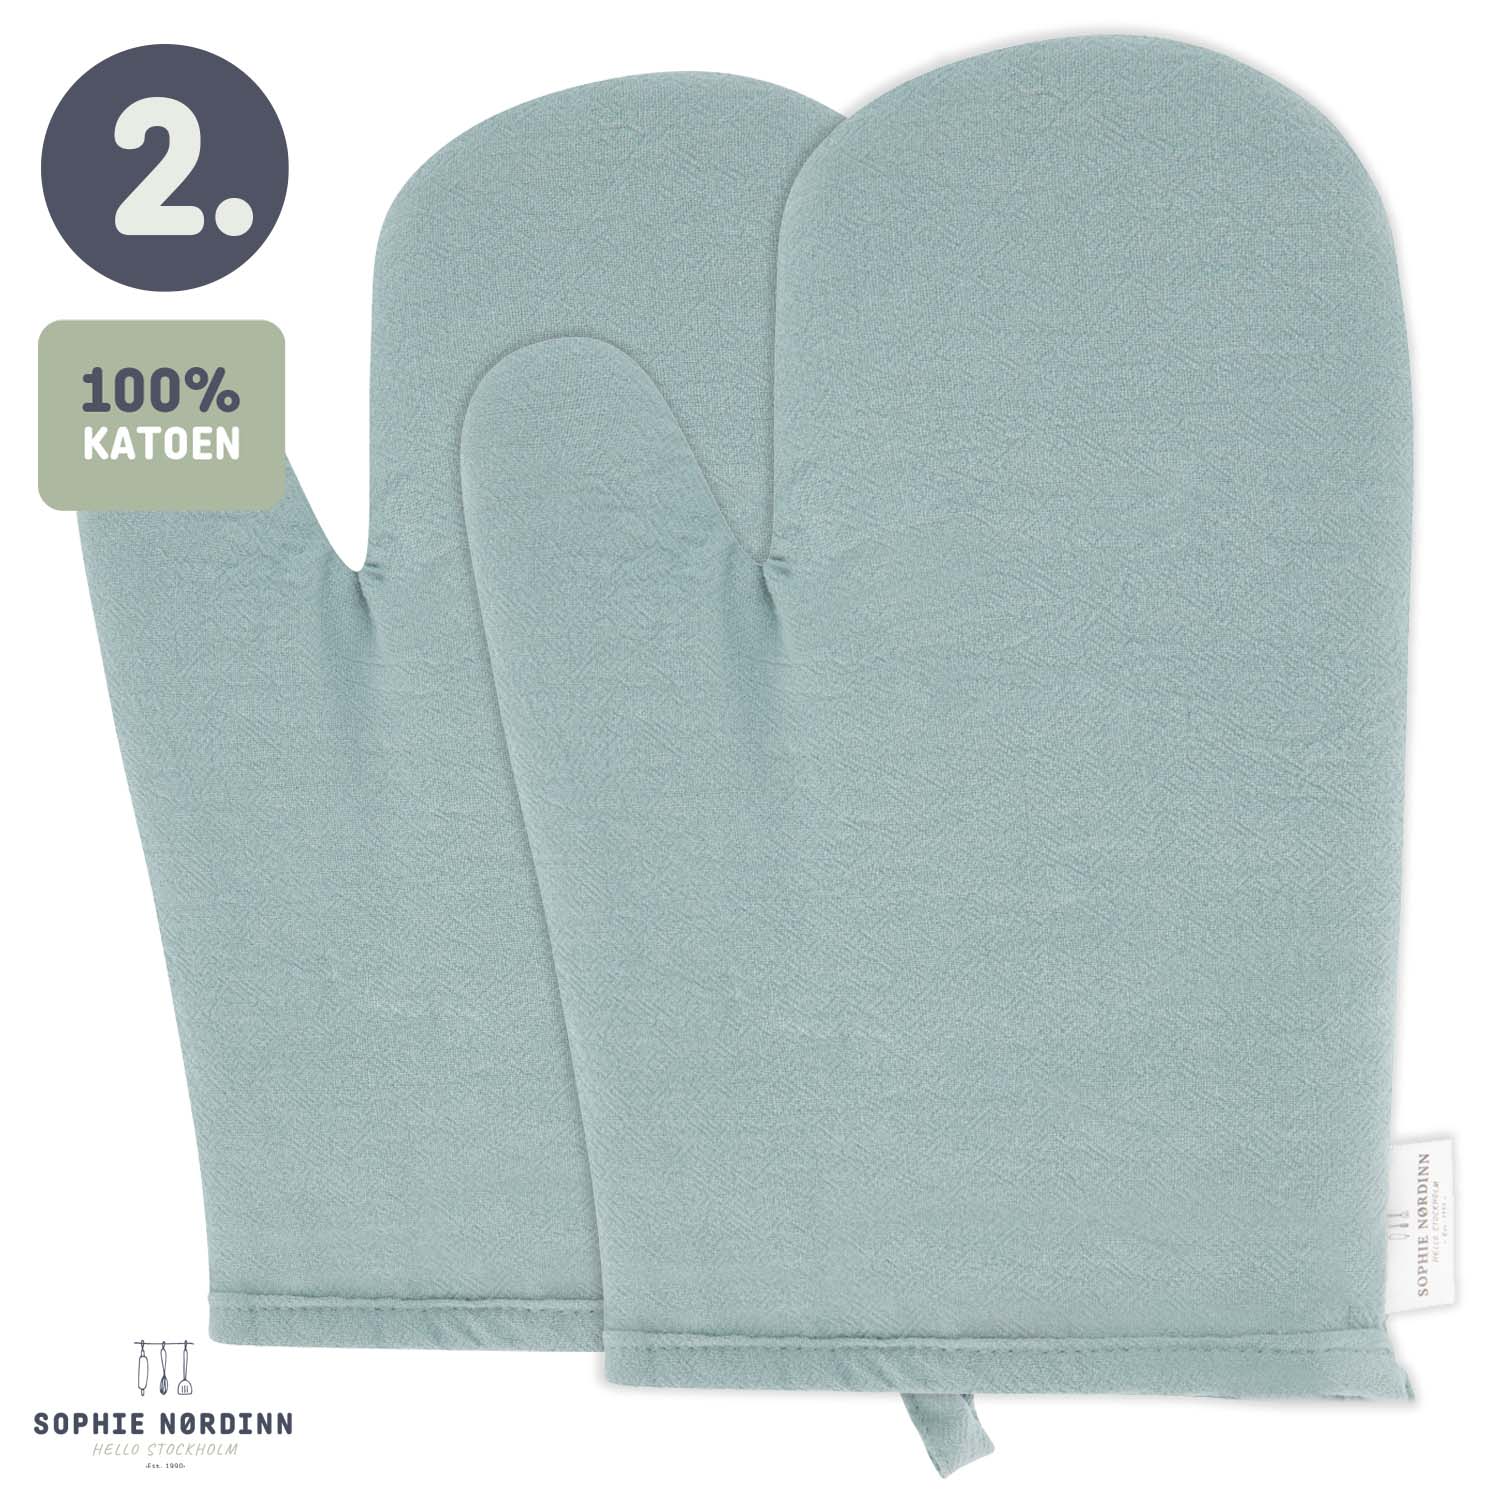 Oven Mitts Nora (Set of 2)